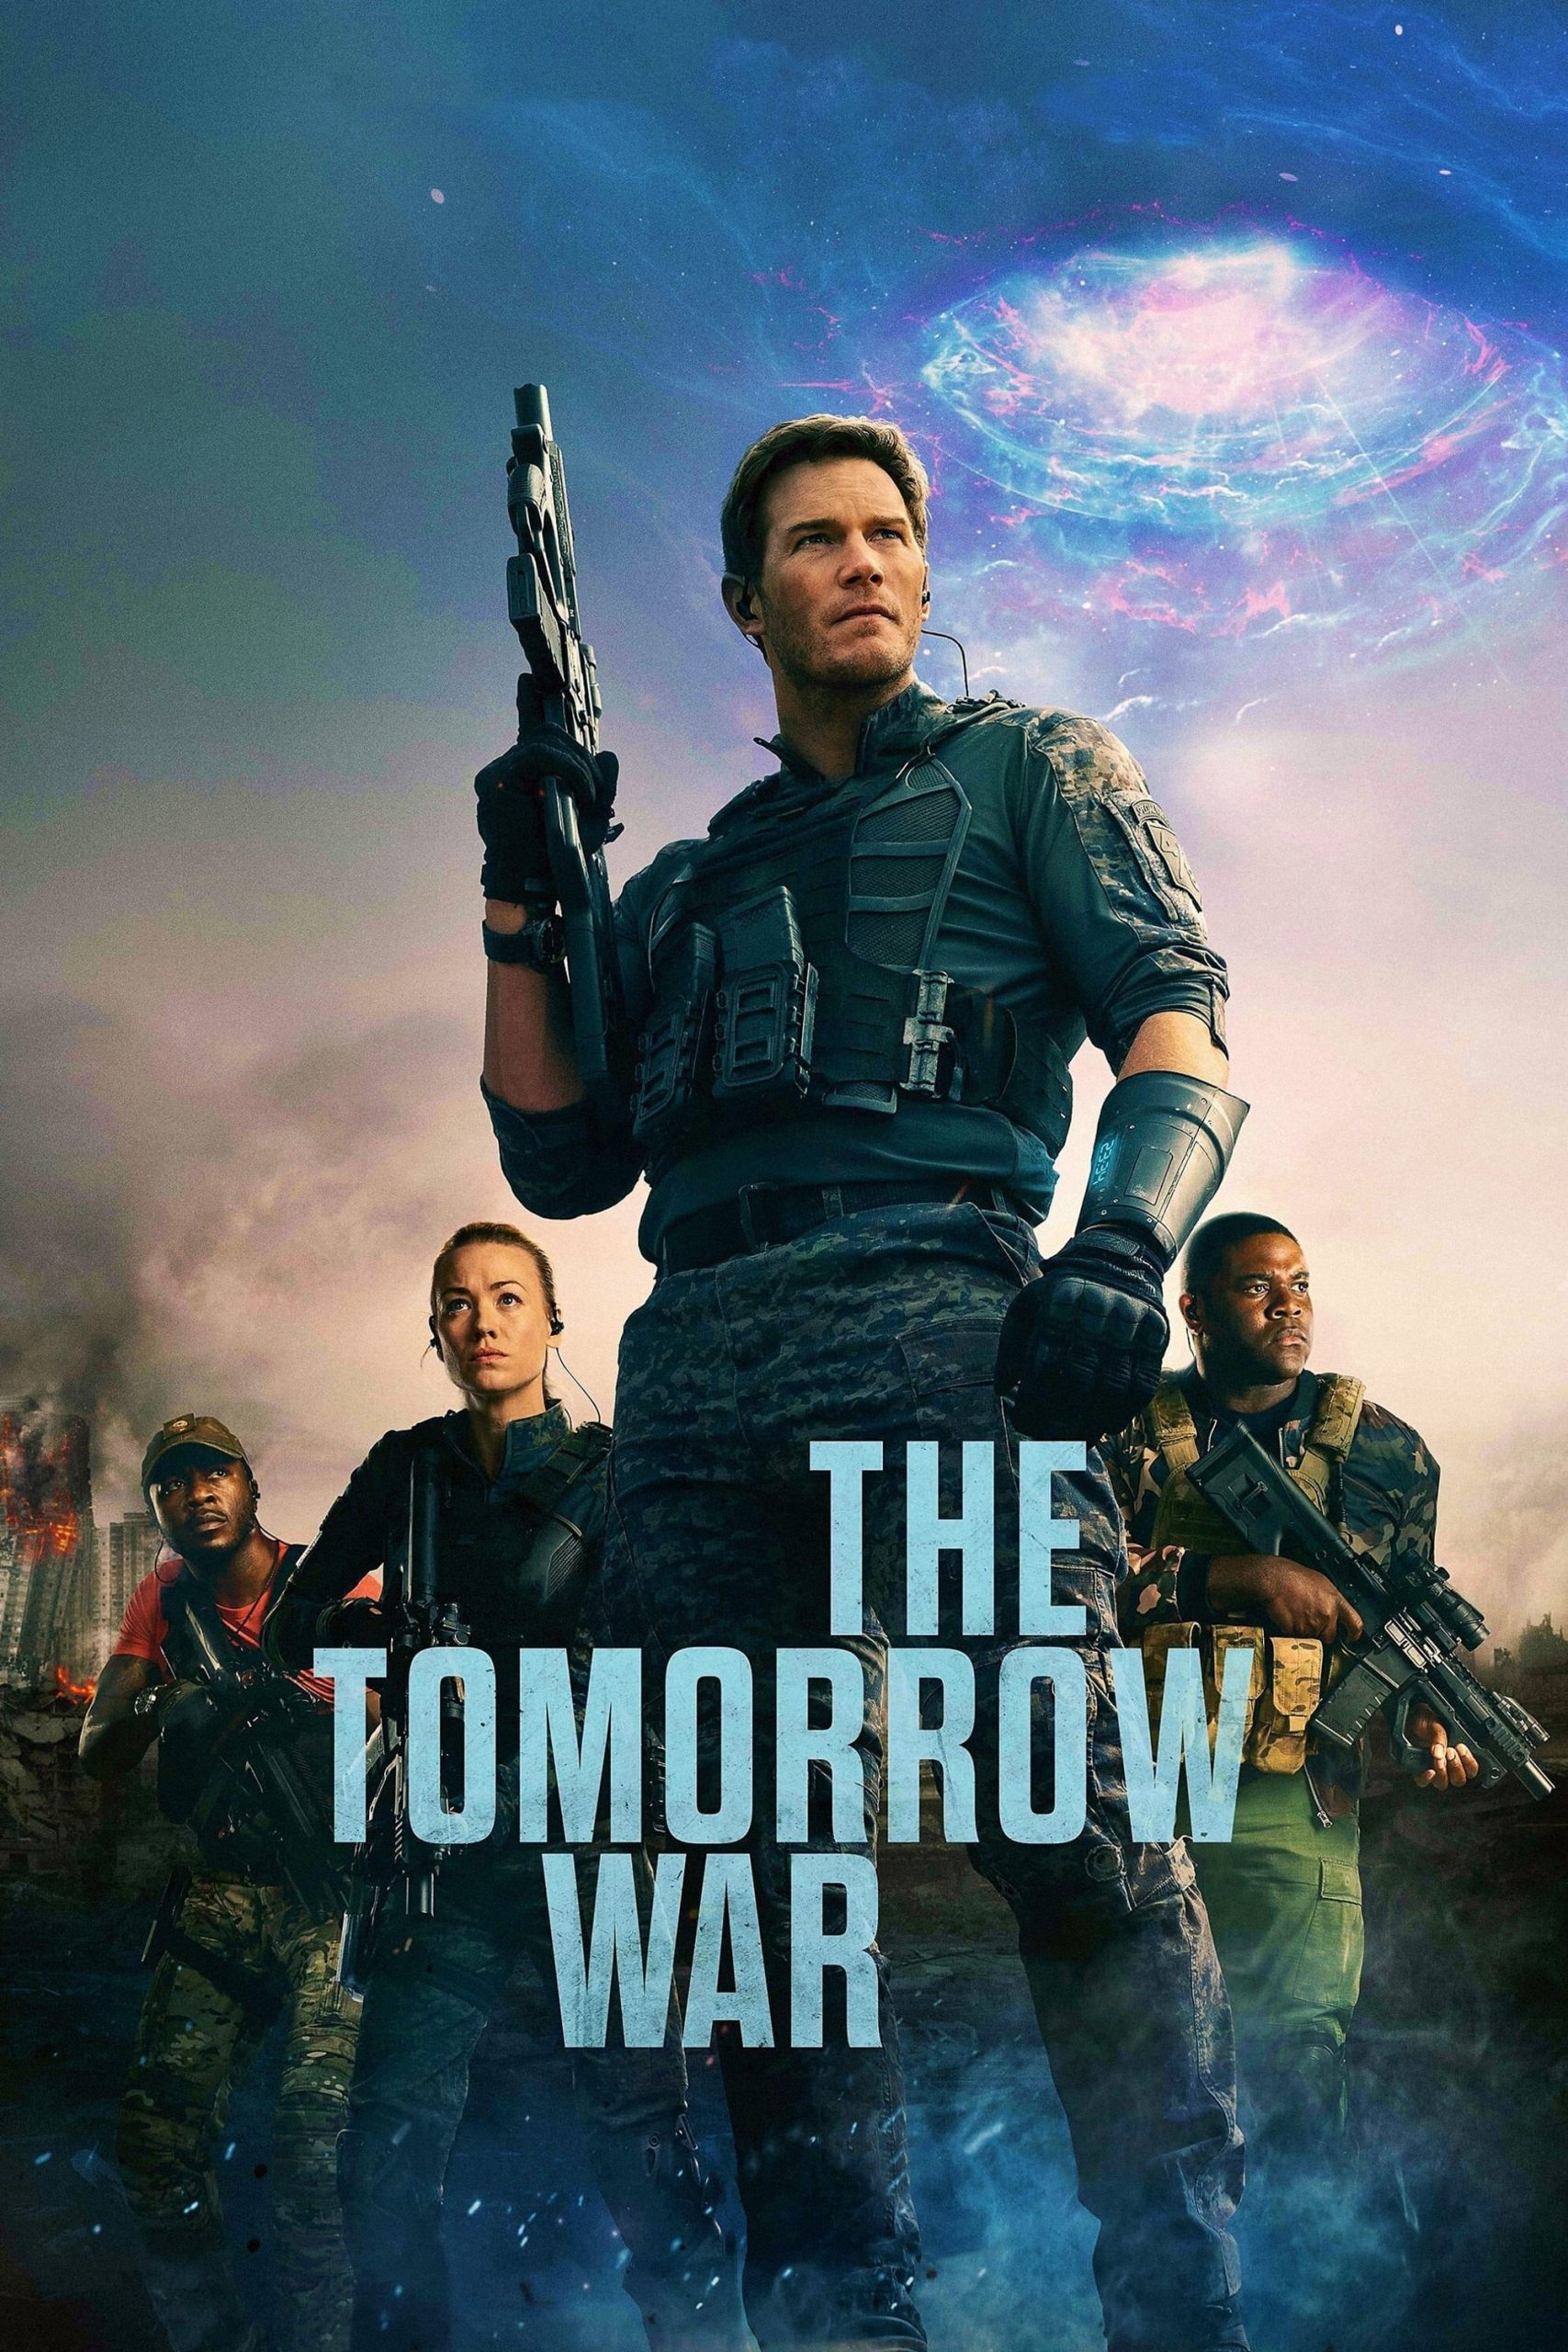 Poster for the movie "The Tomorrow War"